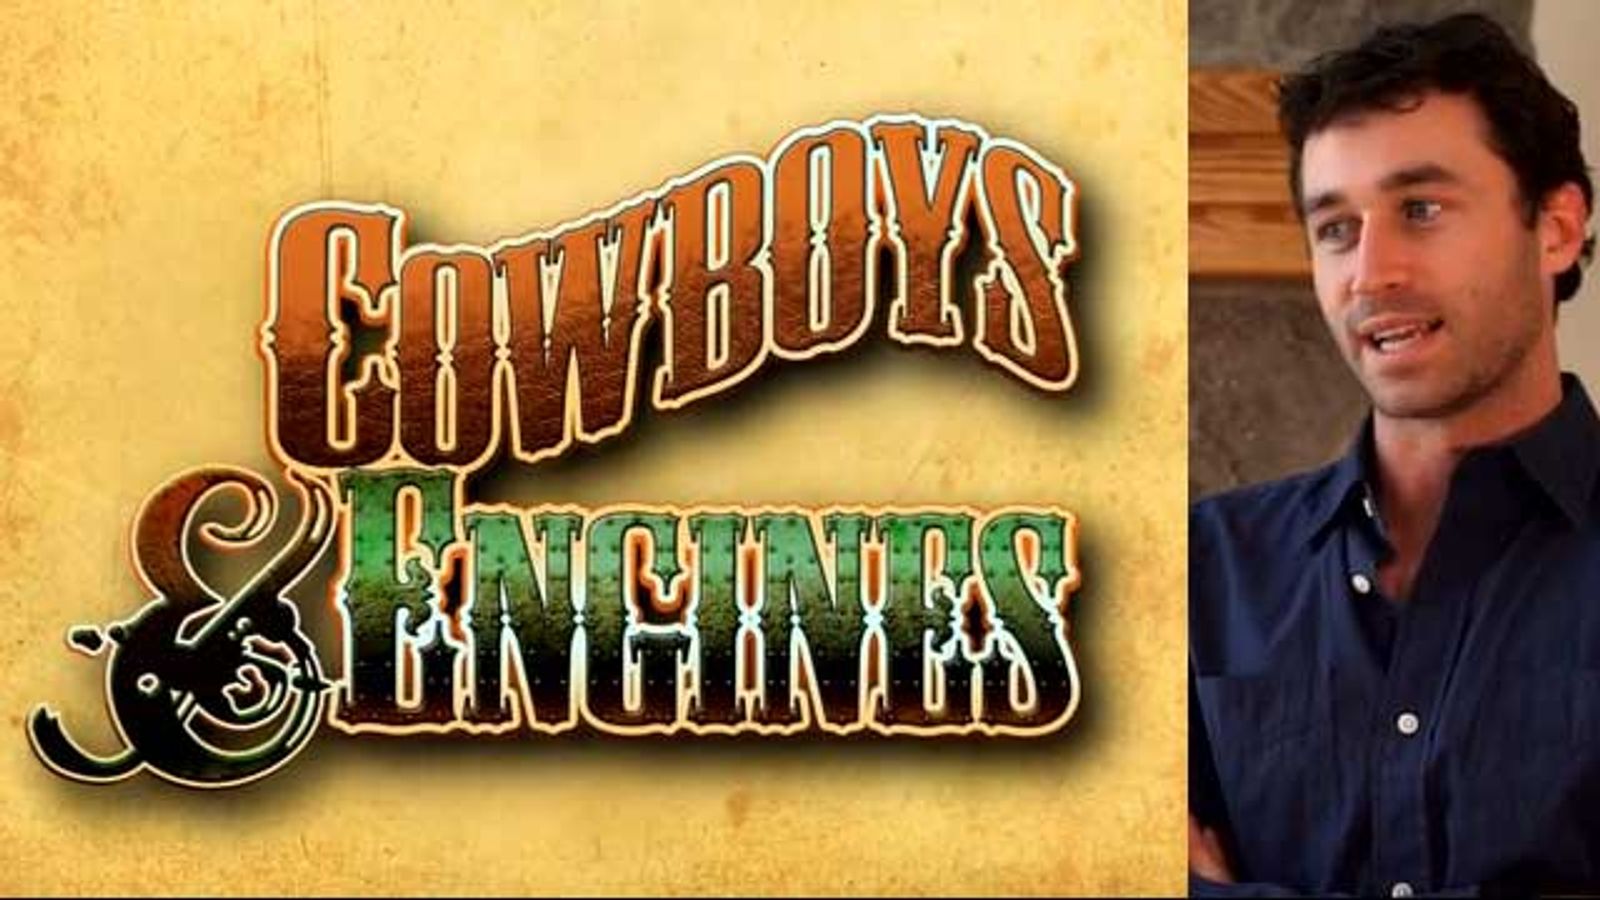 James Deen's 'Cowboys & Engines' Launches Official Website